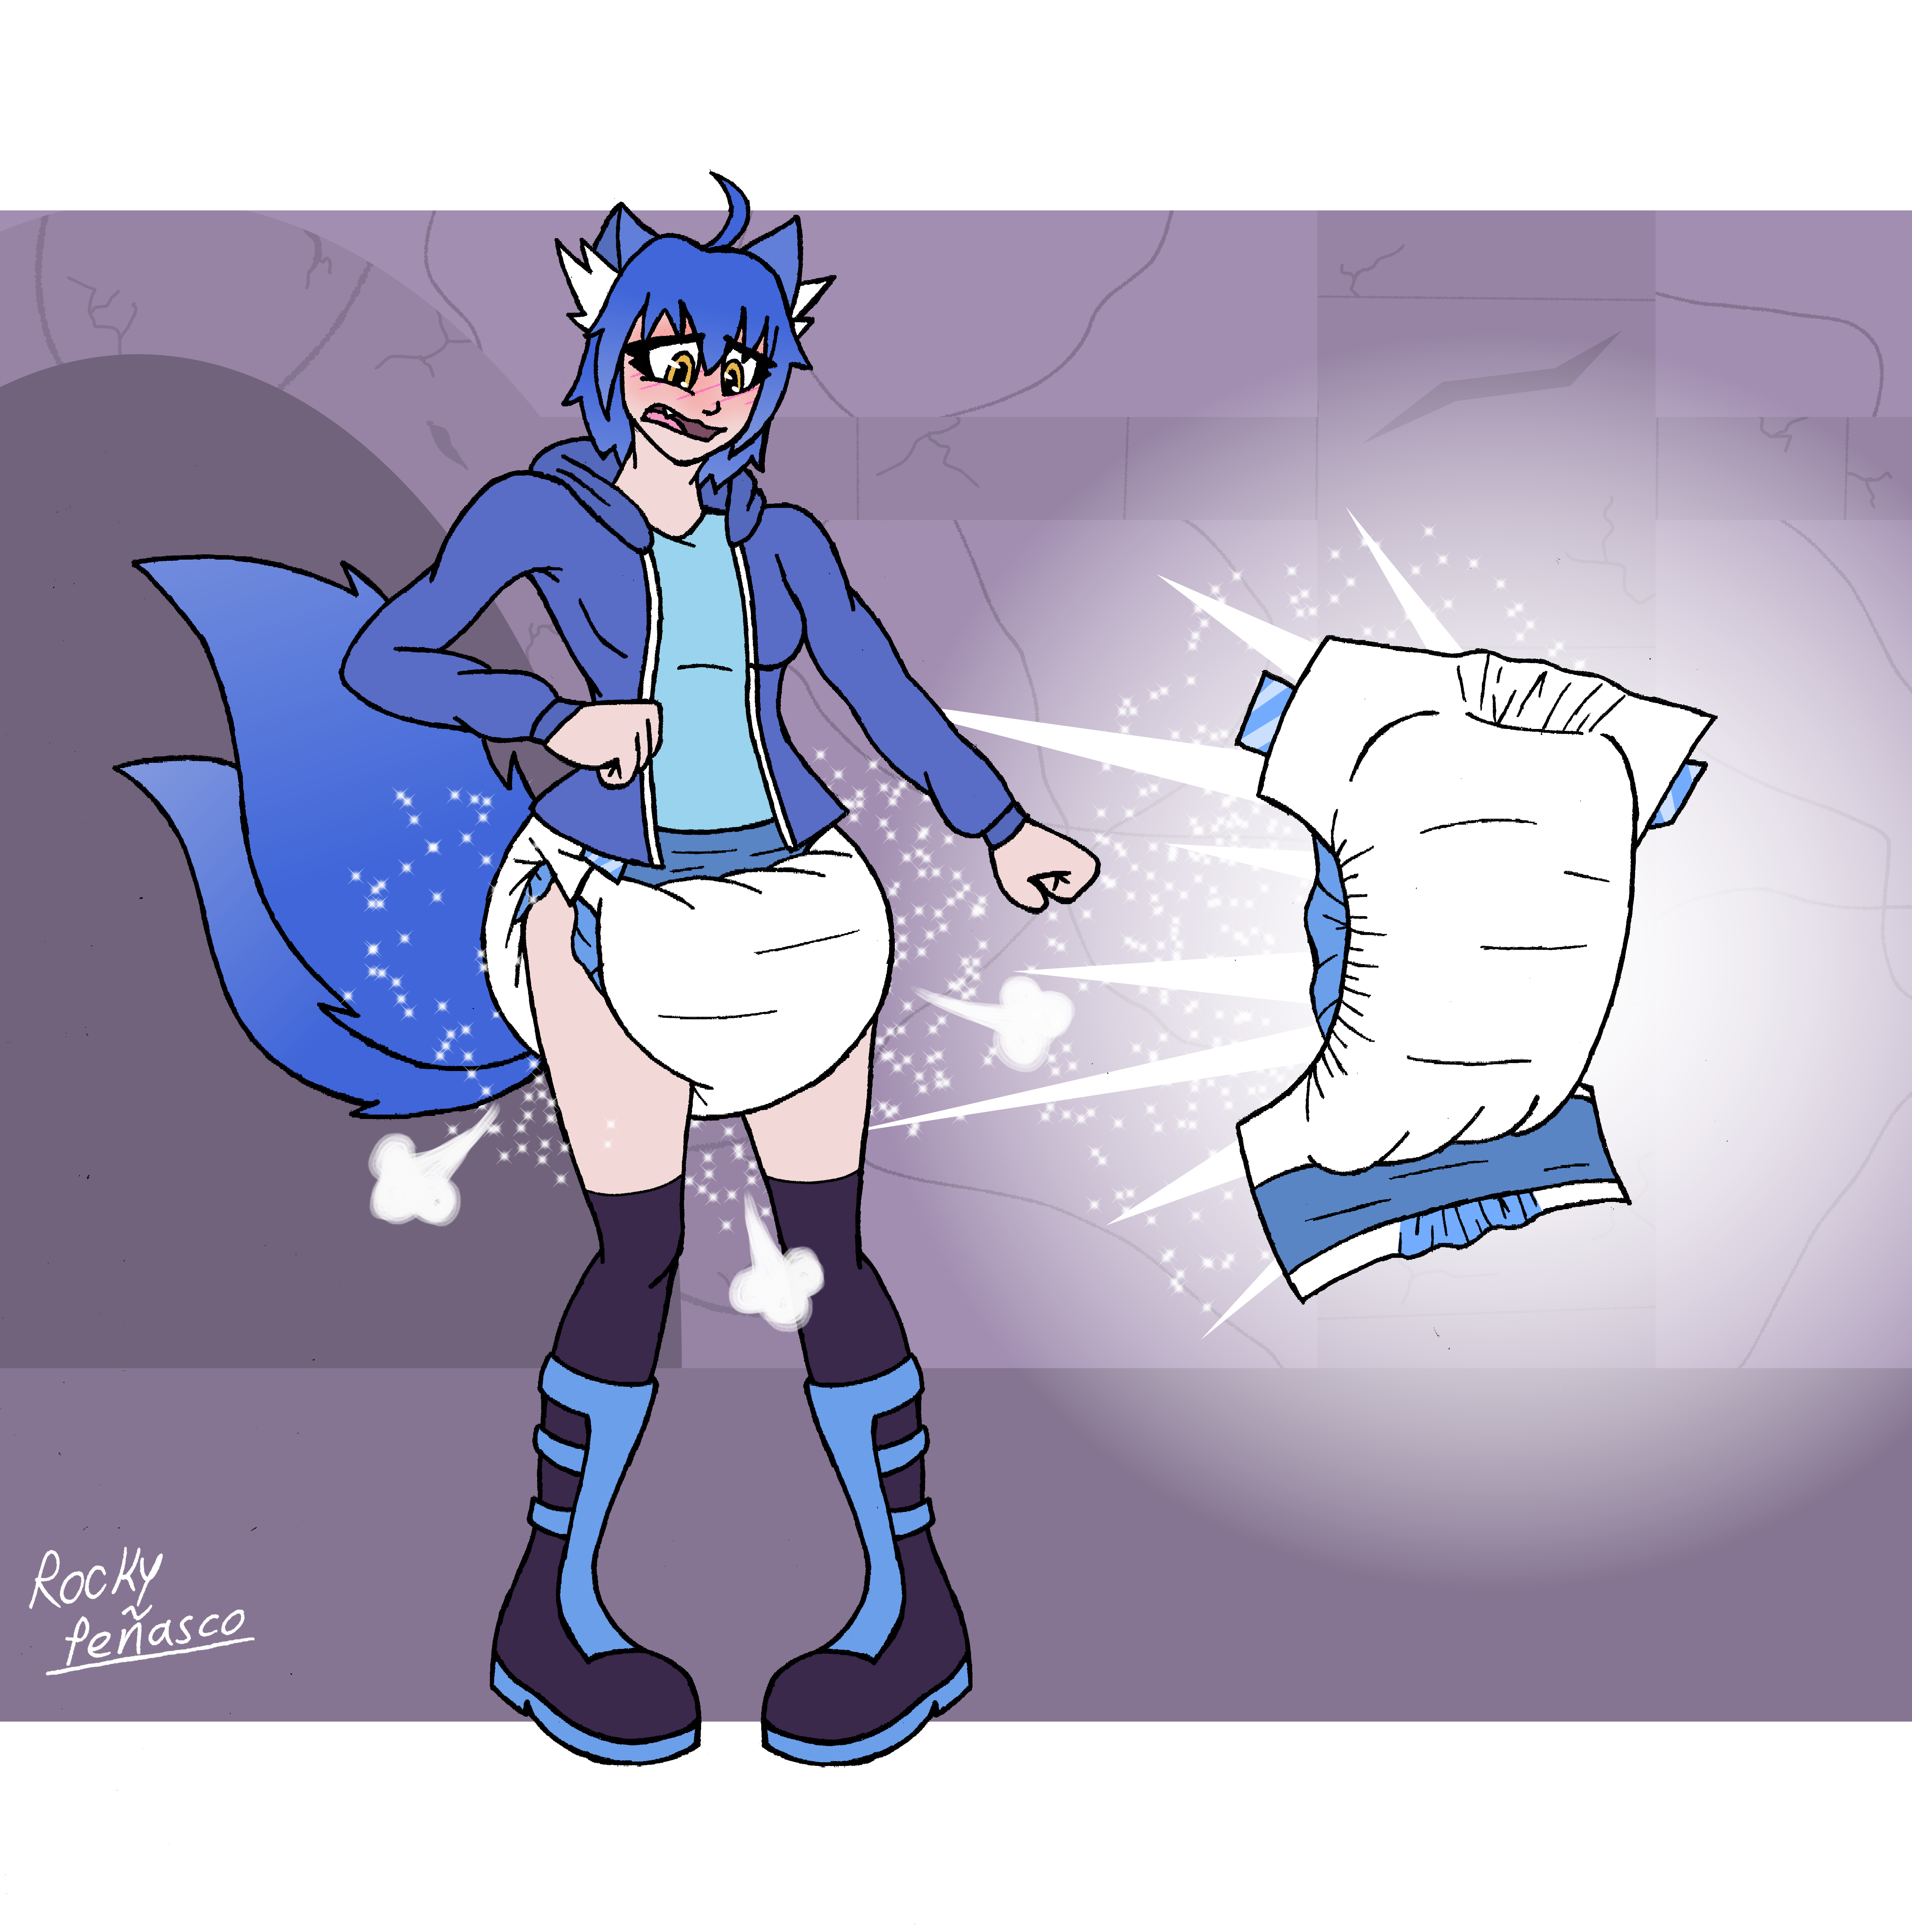 More Diapers For You Toy Doll Furaffinity : Below you can se